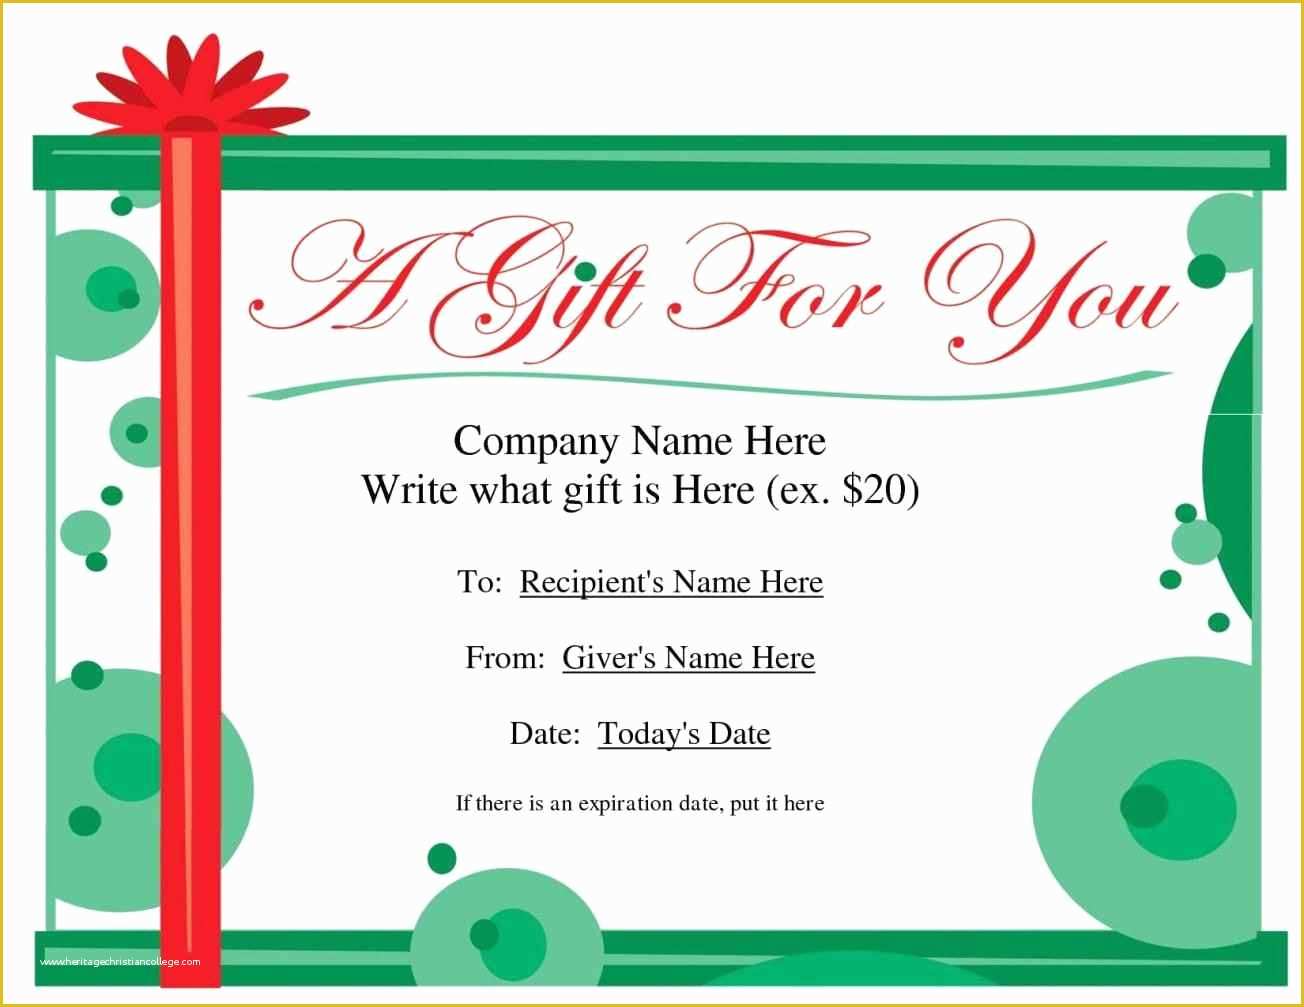 Make Your Own Gift Card Free Printable